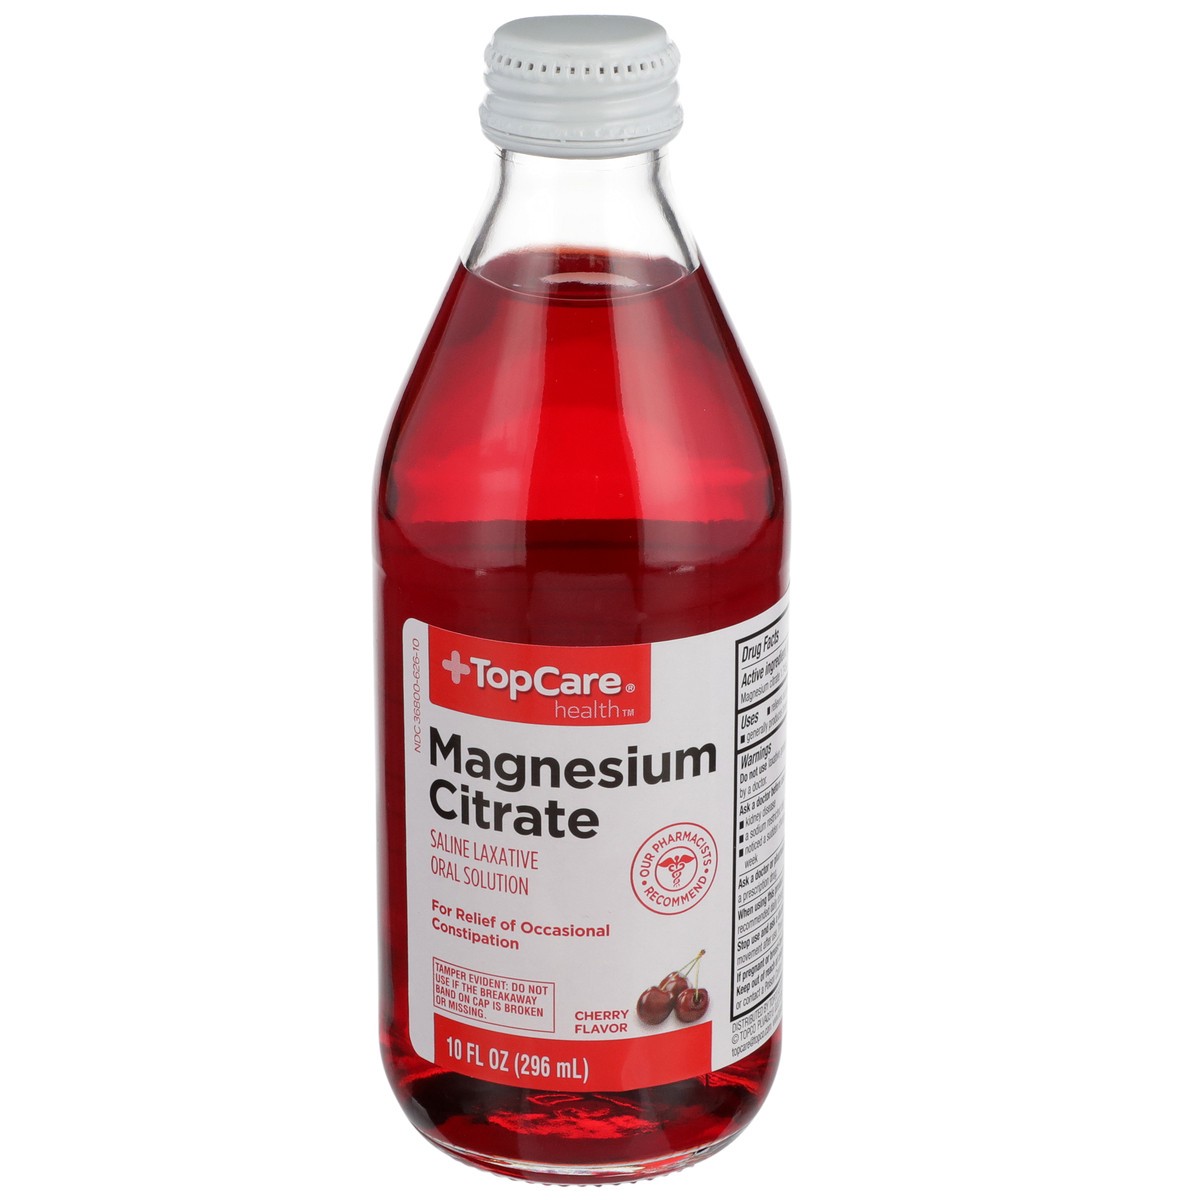 slide 1 of 11, TopCare Magnesium Citrate Saline Laxative Oral Solution, Cherry, 10 fl oz